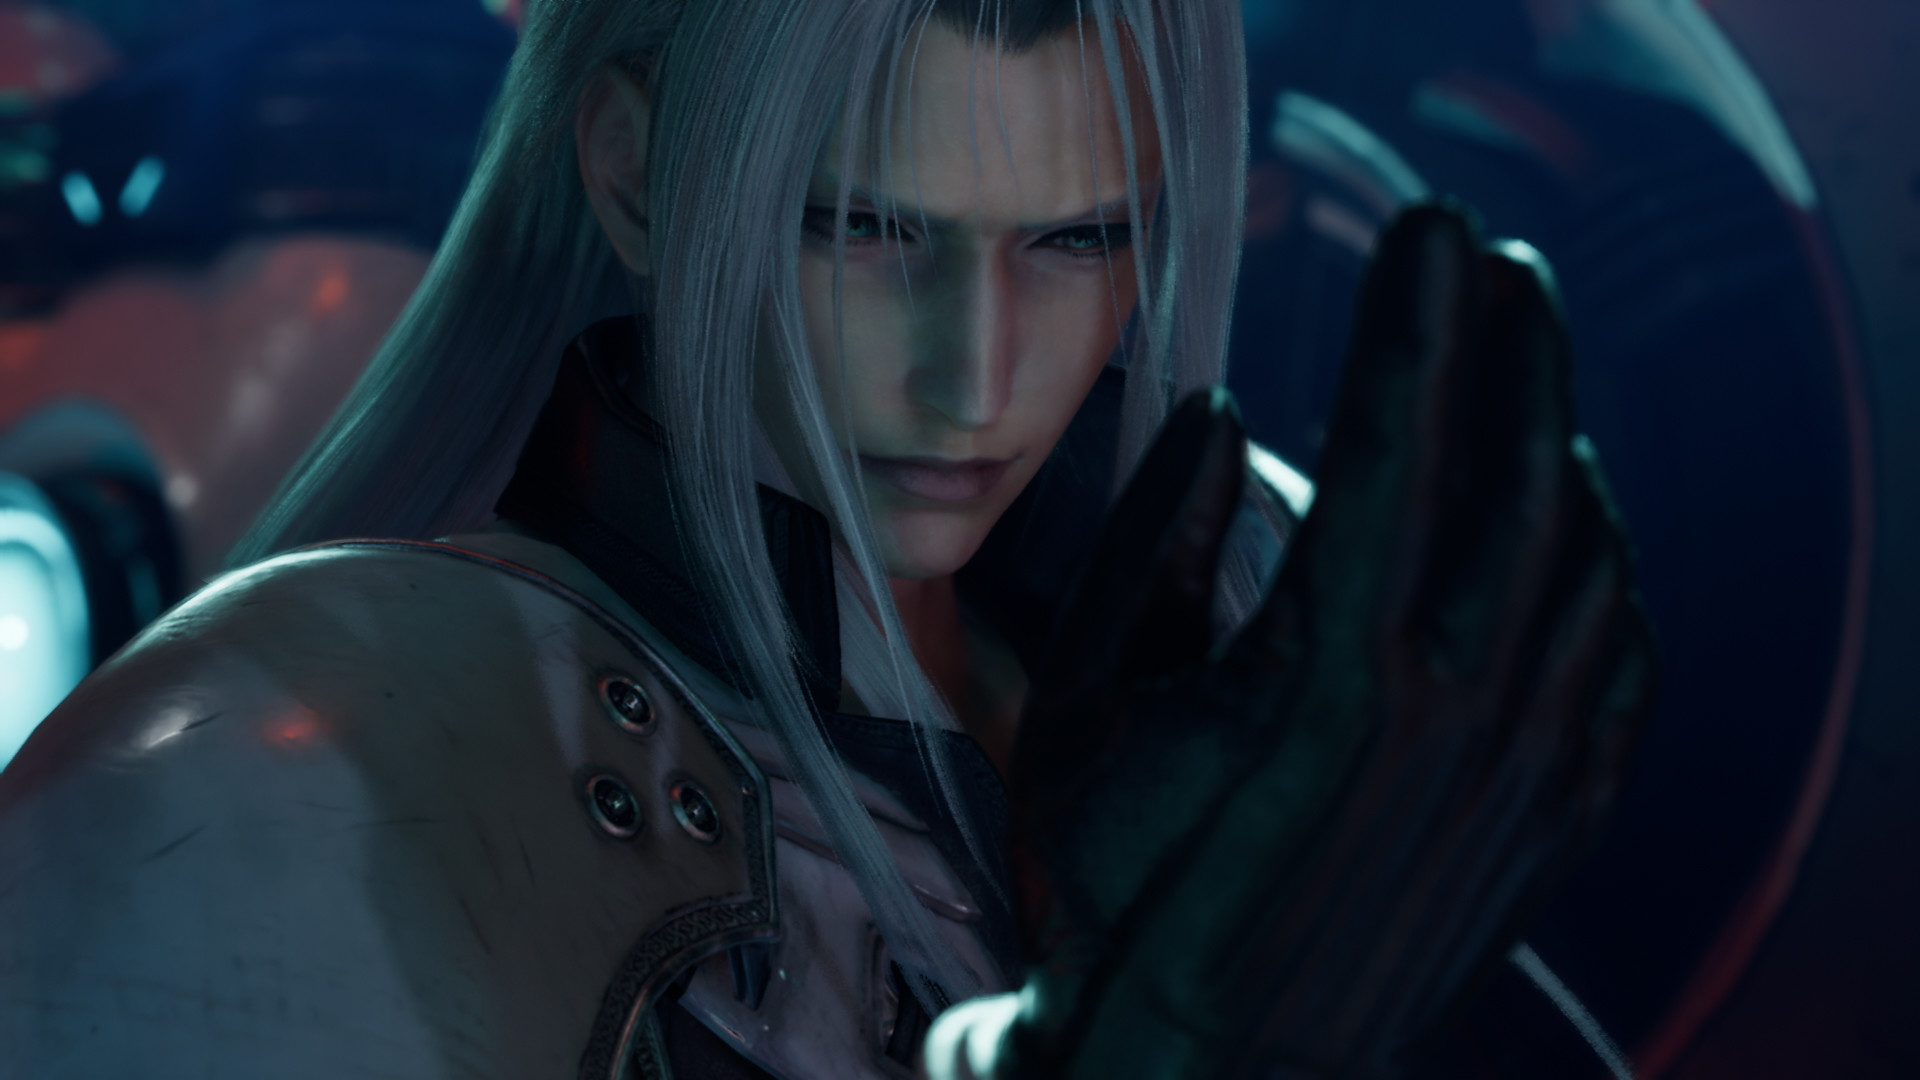 The image shows Sephiroth. 